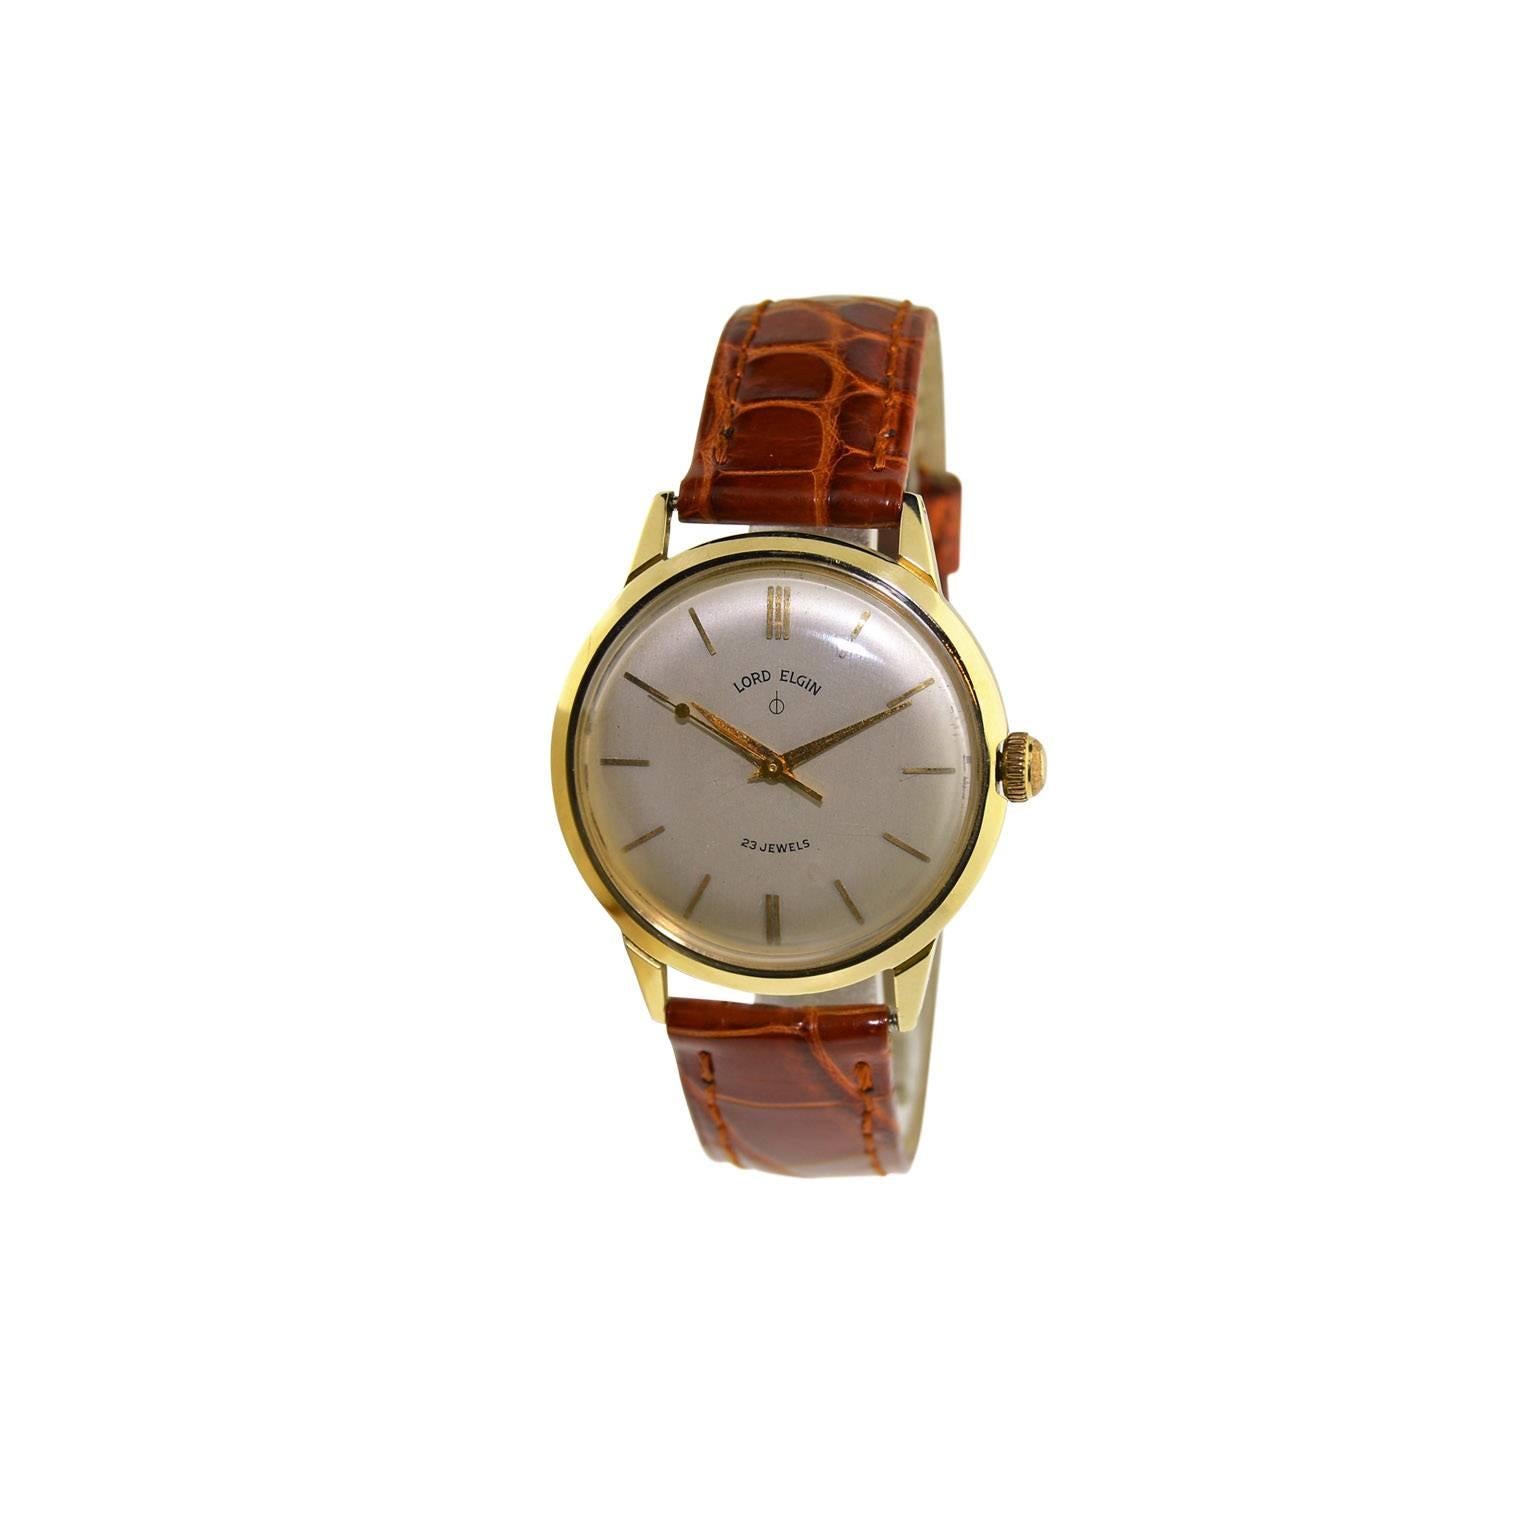 FACTORY / HOUSE:  Elgin Watch Company
STYLE / REFERENCE: Moderne / Dress Style
METAL / MATERIAL:  14 Kt Yellow Gold 
DIMENSIONS: 41 mm  X 35  mm
CIRCA: 1950's 
MOVEMENT / CALIBER:  Manual Winding /  23 Jewels 
DIAL / HANDS:  Original Silvered Satin